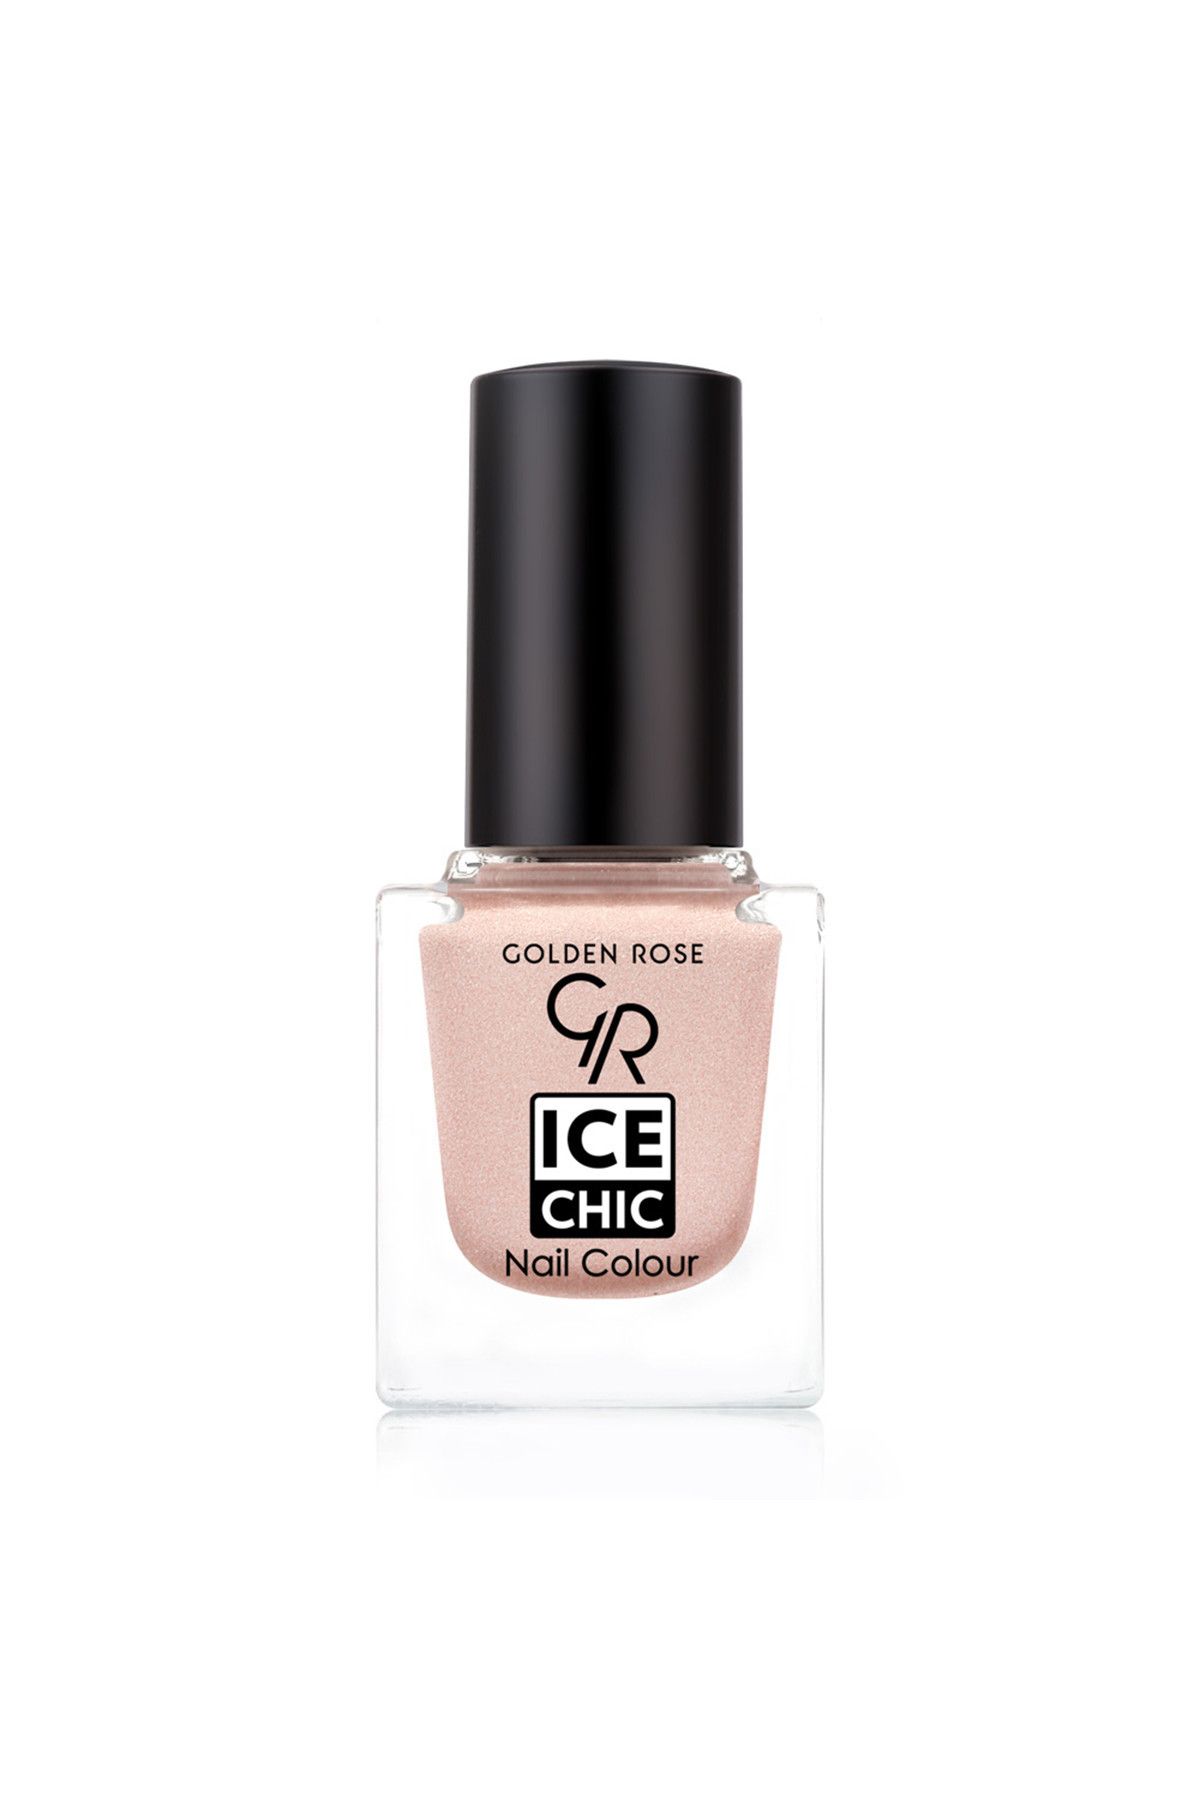 Golden Rose Oje - Ice Chic Nail Colour No: 118 8691190873783